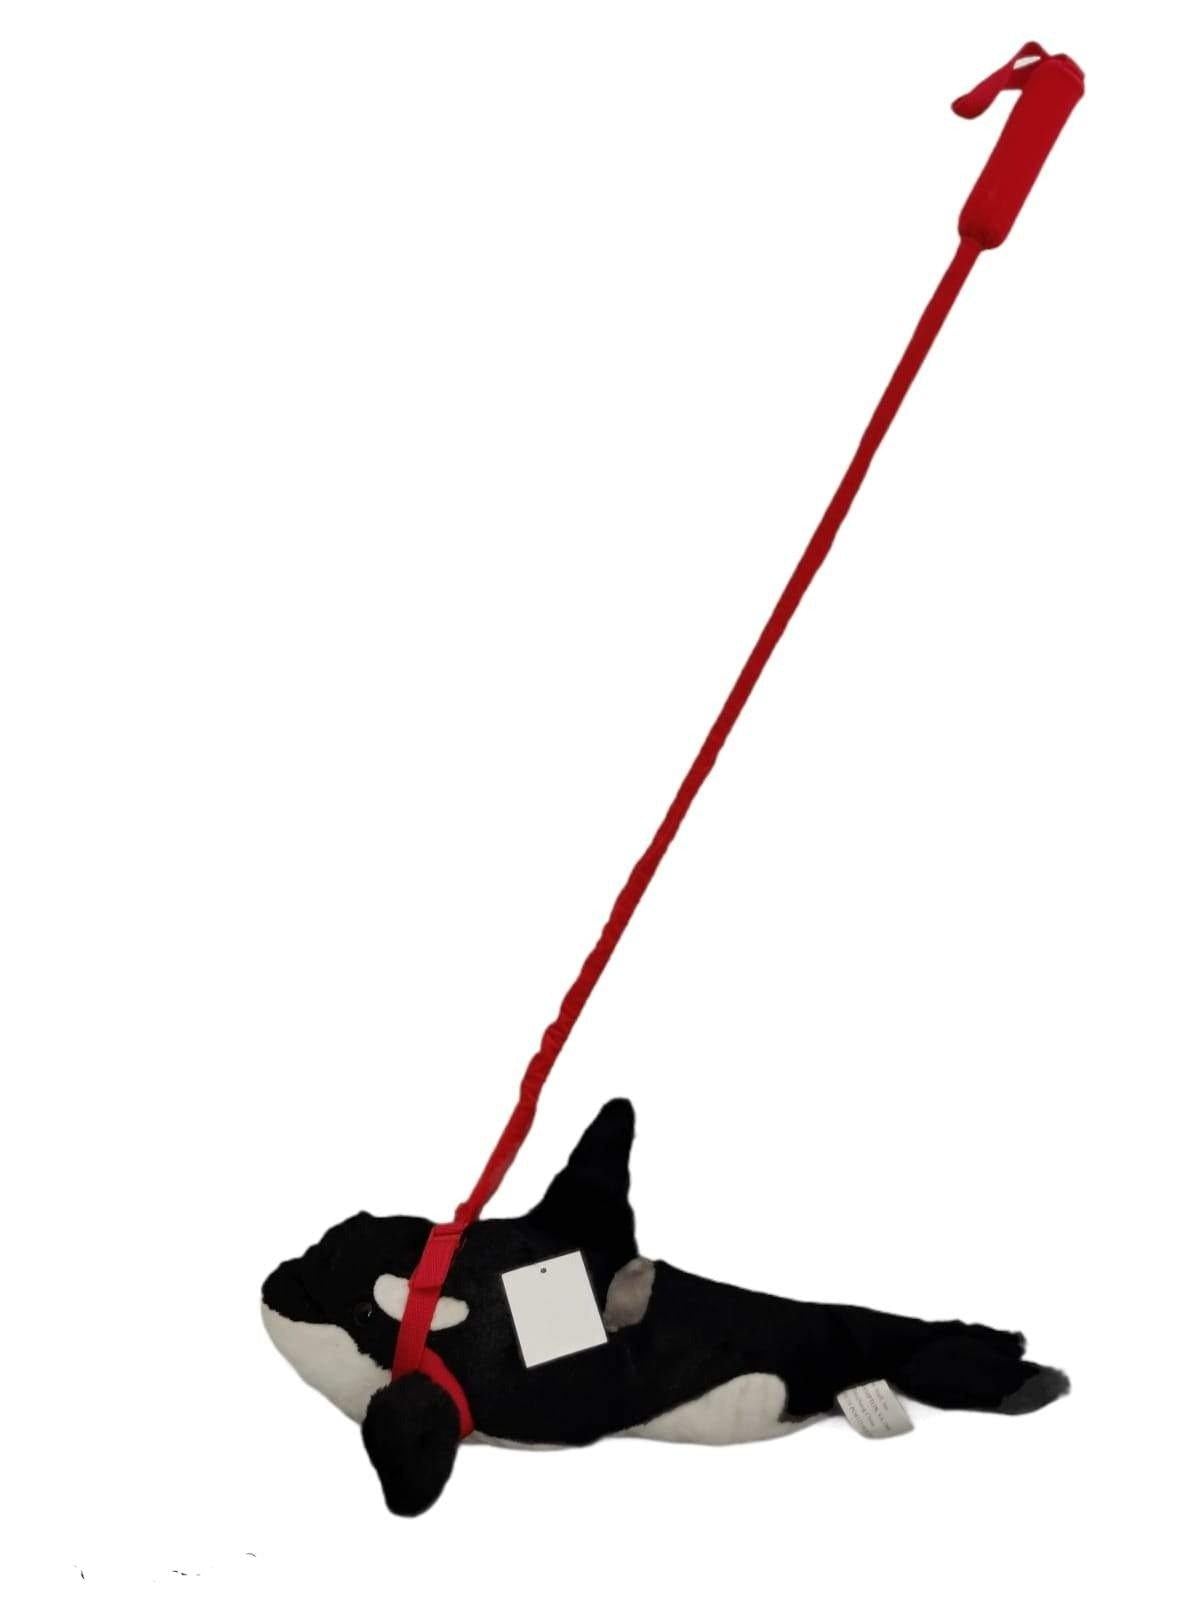 Sea Life Plush Toy On An Extendable Red Leash